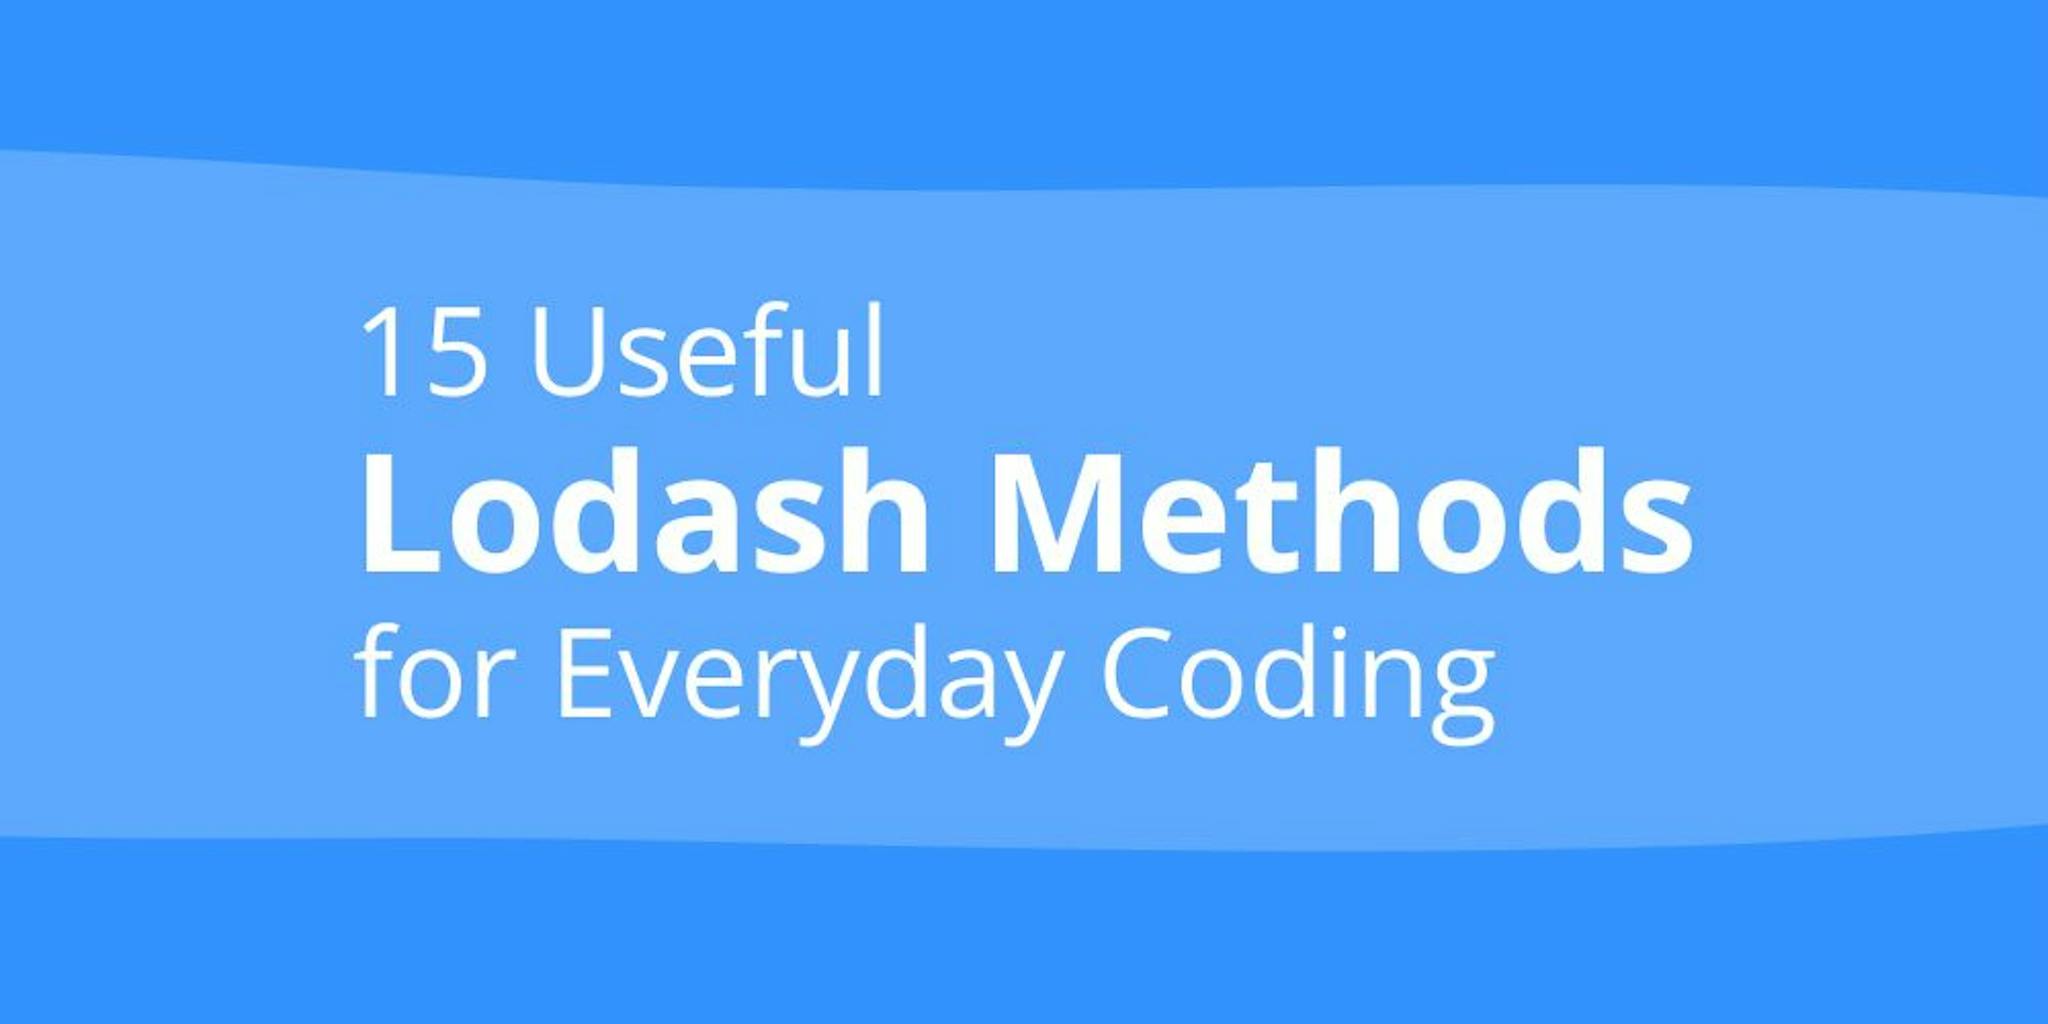 featured image - 15 Lodash methods for everyday coding